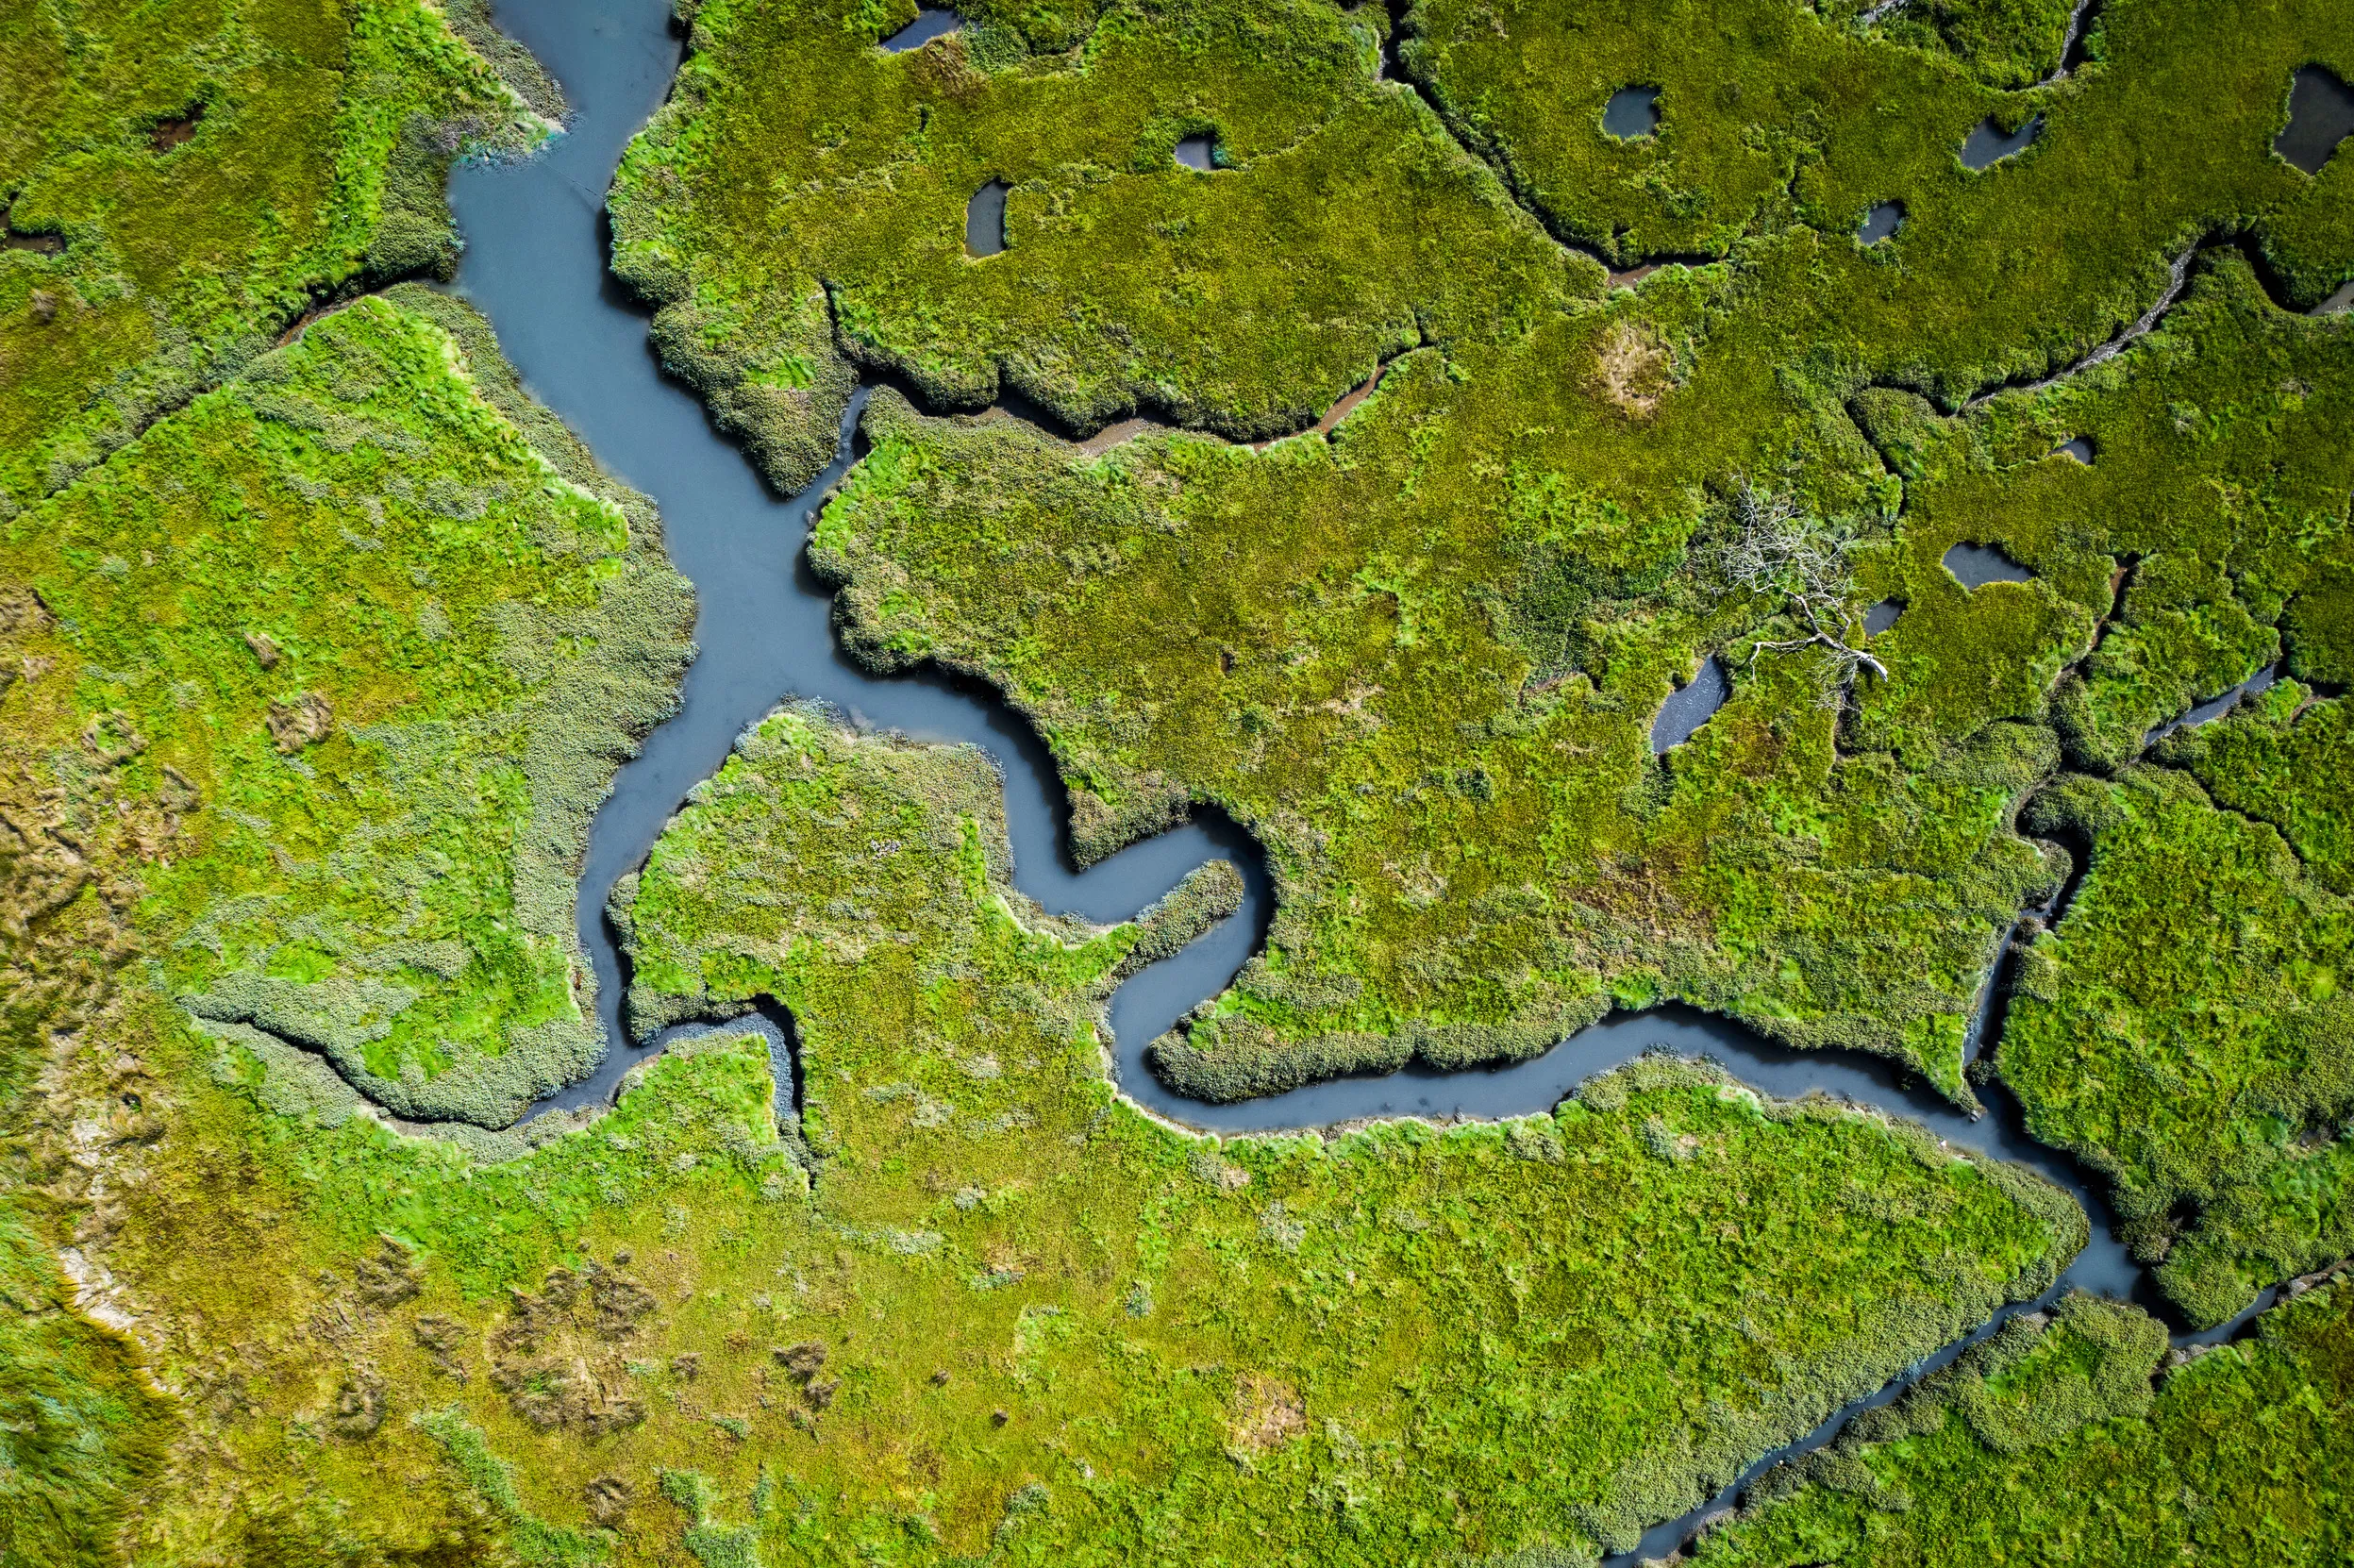 Bird's eye view of coastal wetland, green marshes with a meandering river cutting through the centre. 